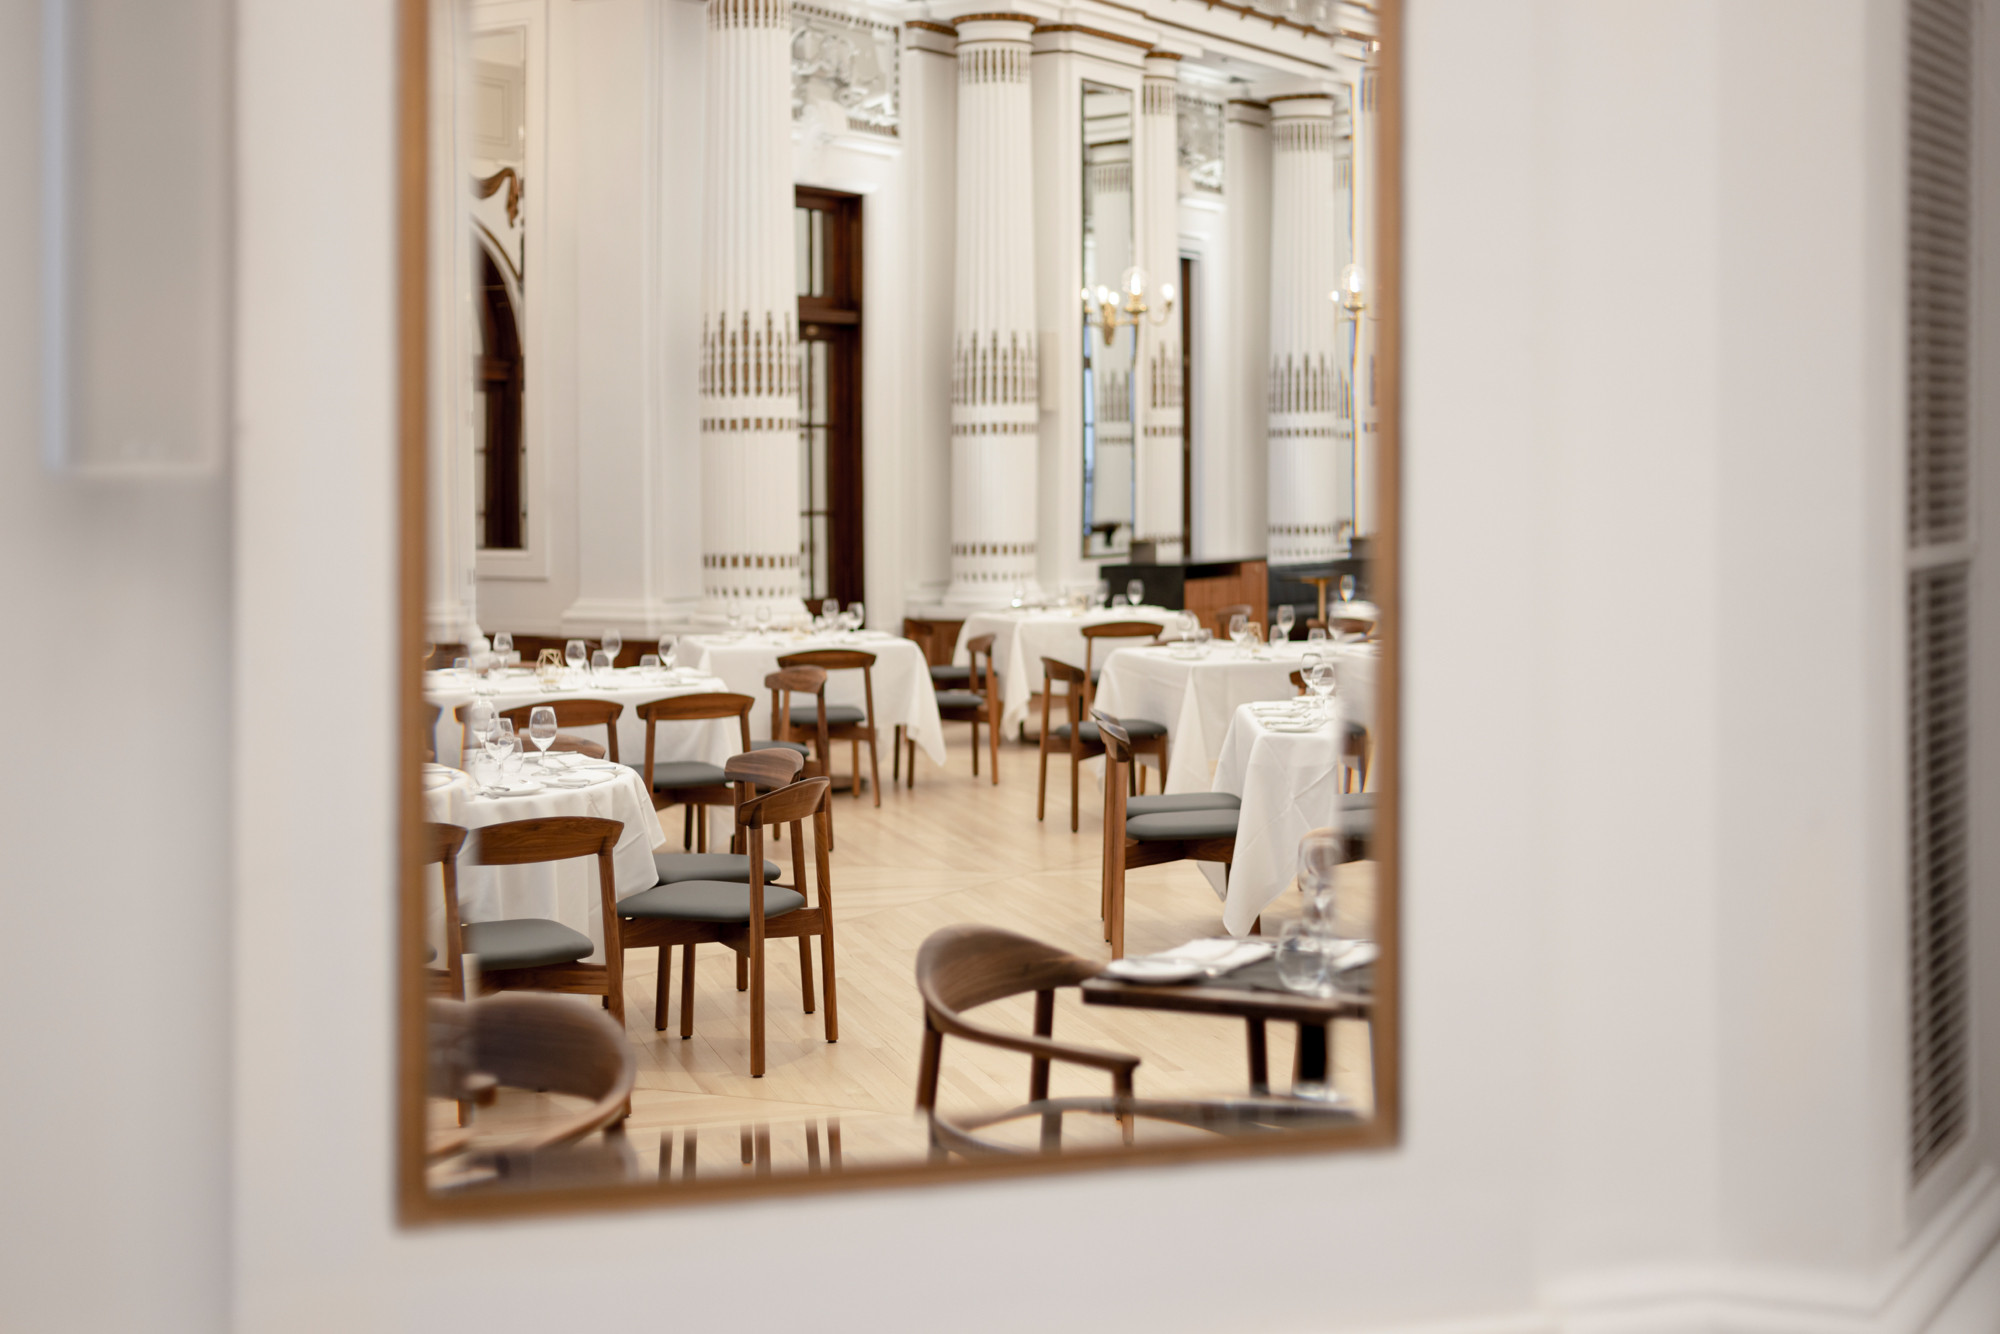 View of the Le Parlementaire restaurante in mirror reflection